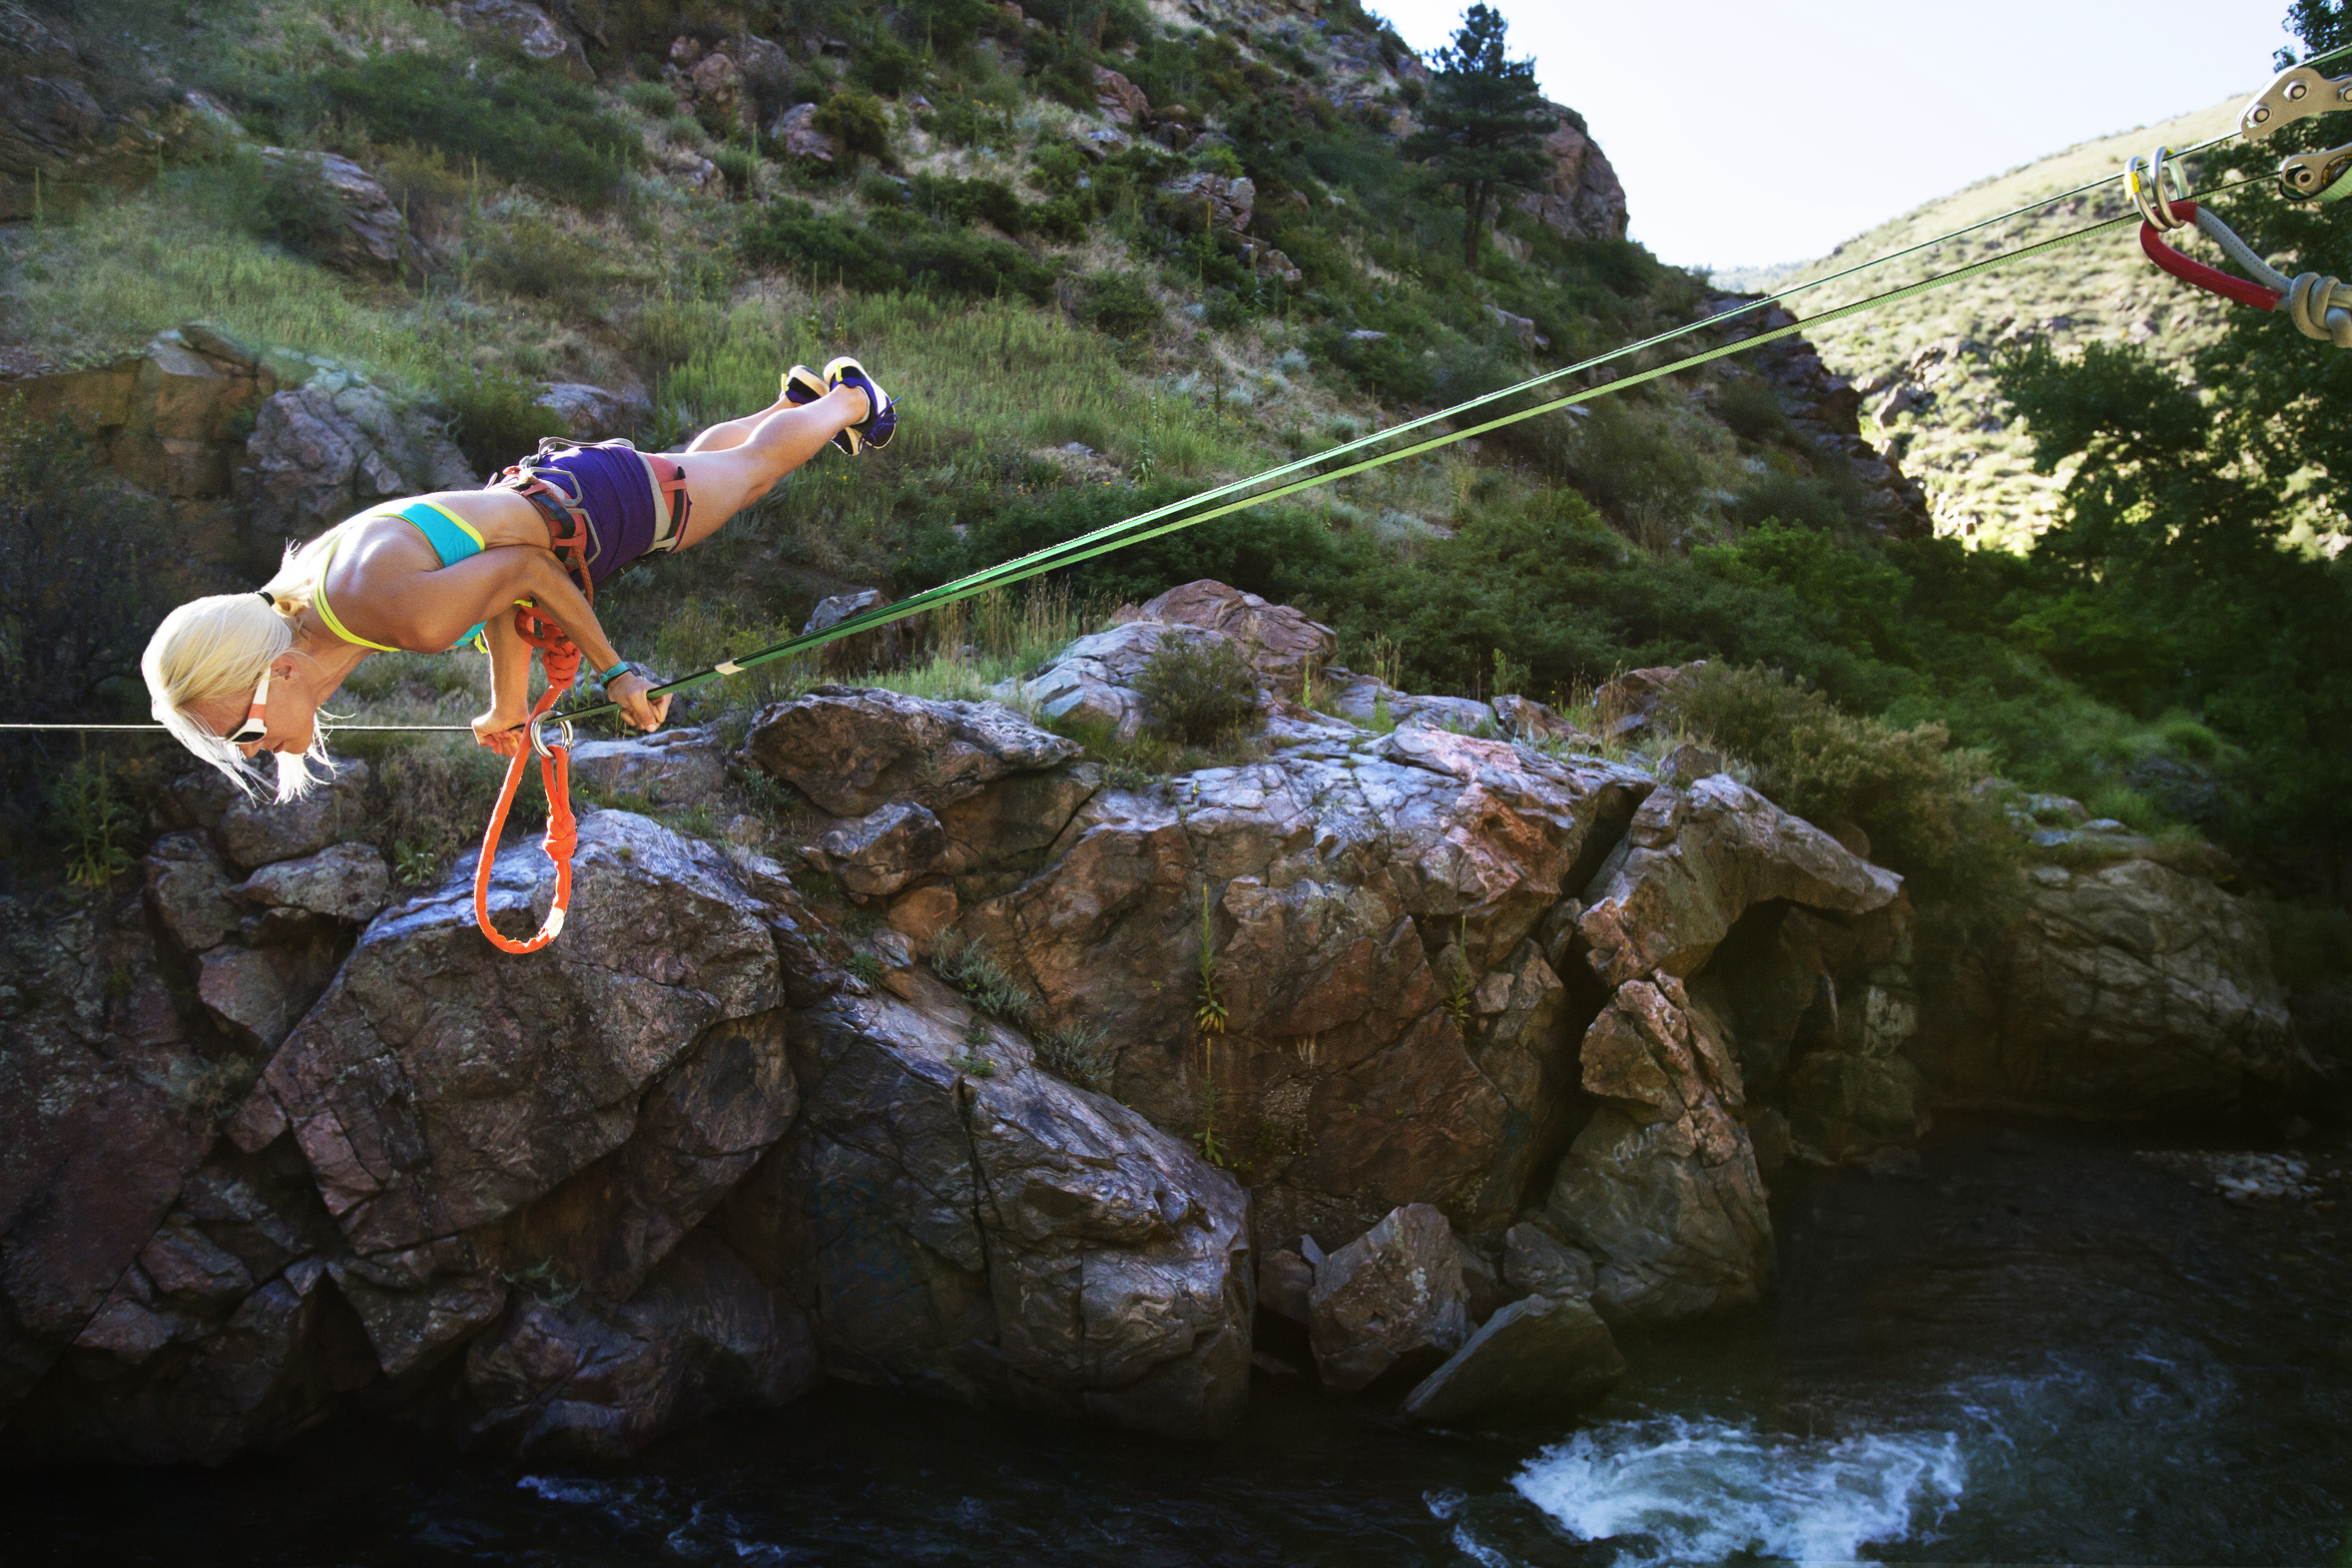 Woman balancing on rope while slacklining over river